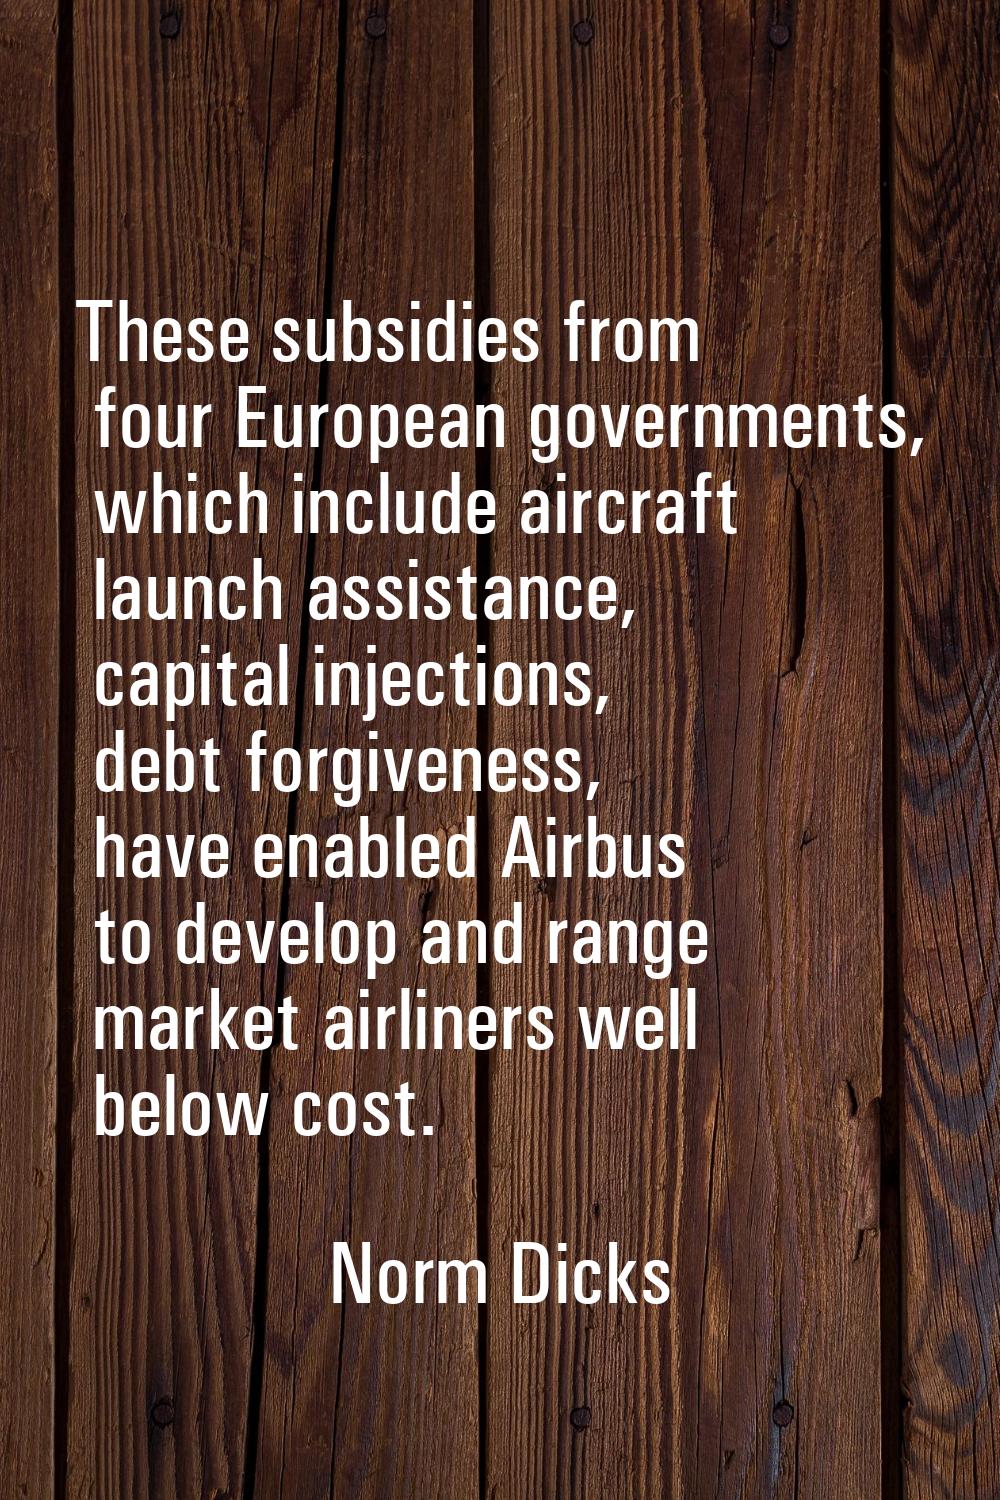 These subsidies from four European governments, which include aircraft launch assistance, capital i